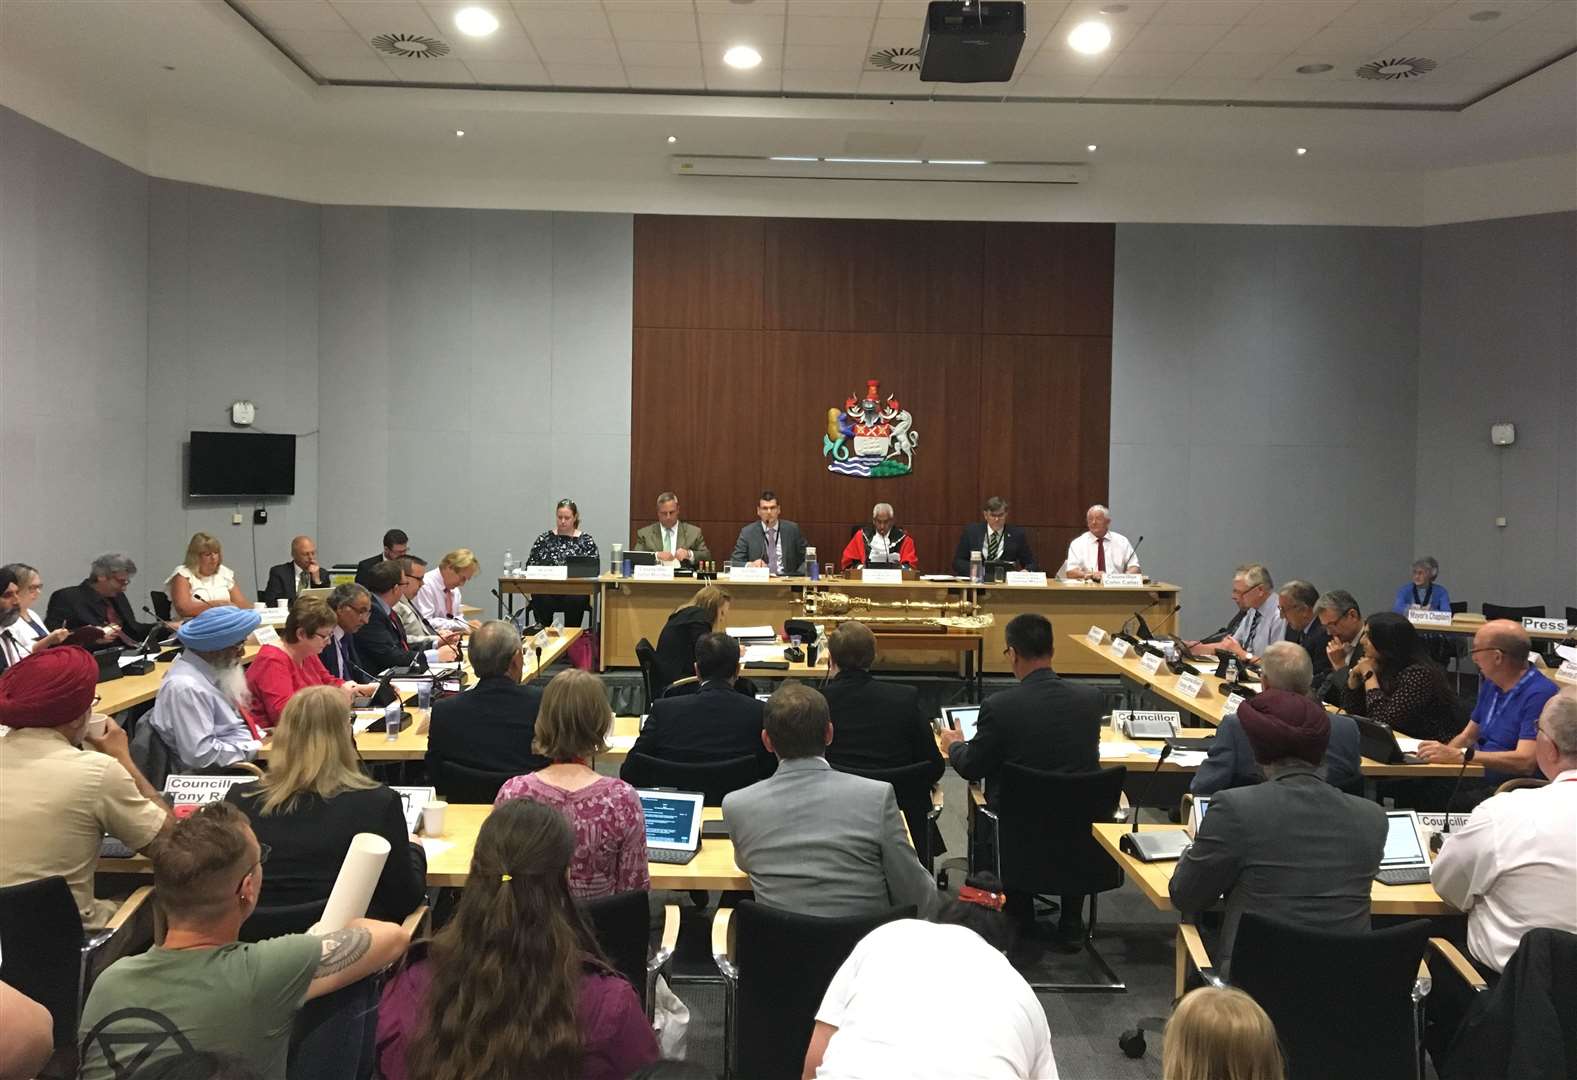 The costs of anti-bullying courses were revealed at a council meeting on Tuesday, June 25